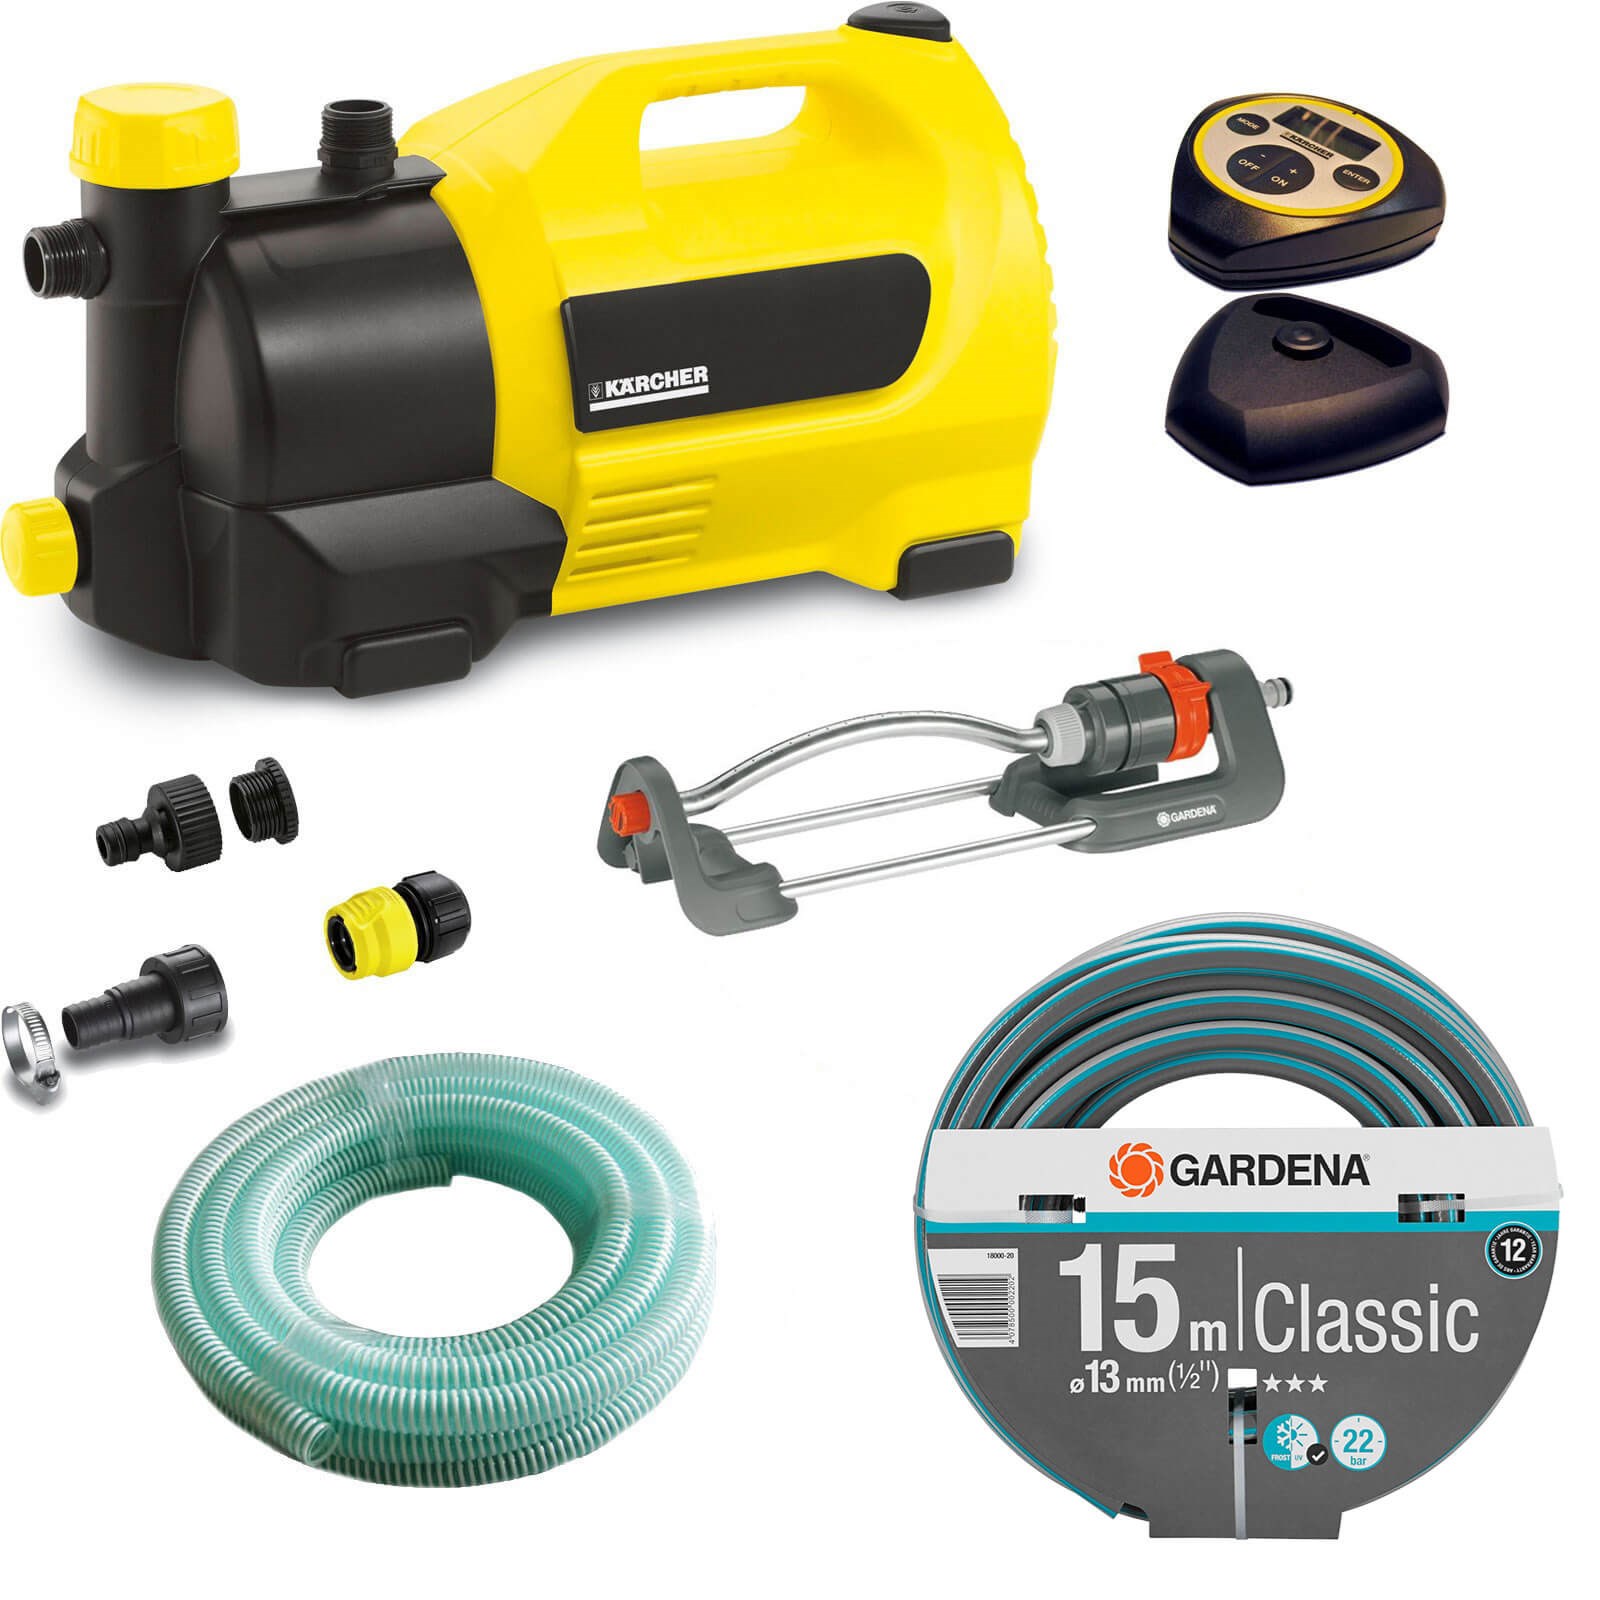 Karcher Gp 50 Mc Surface Water Pump With Garden Hose And